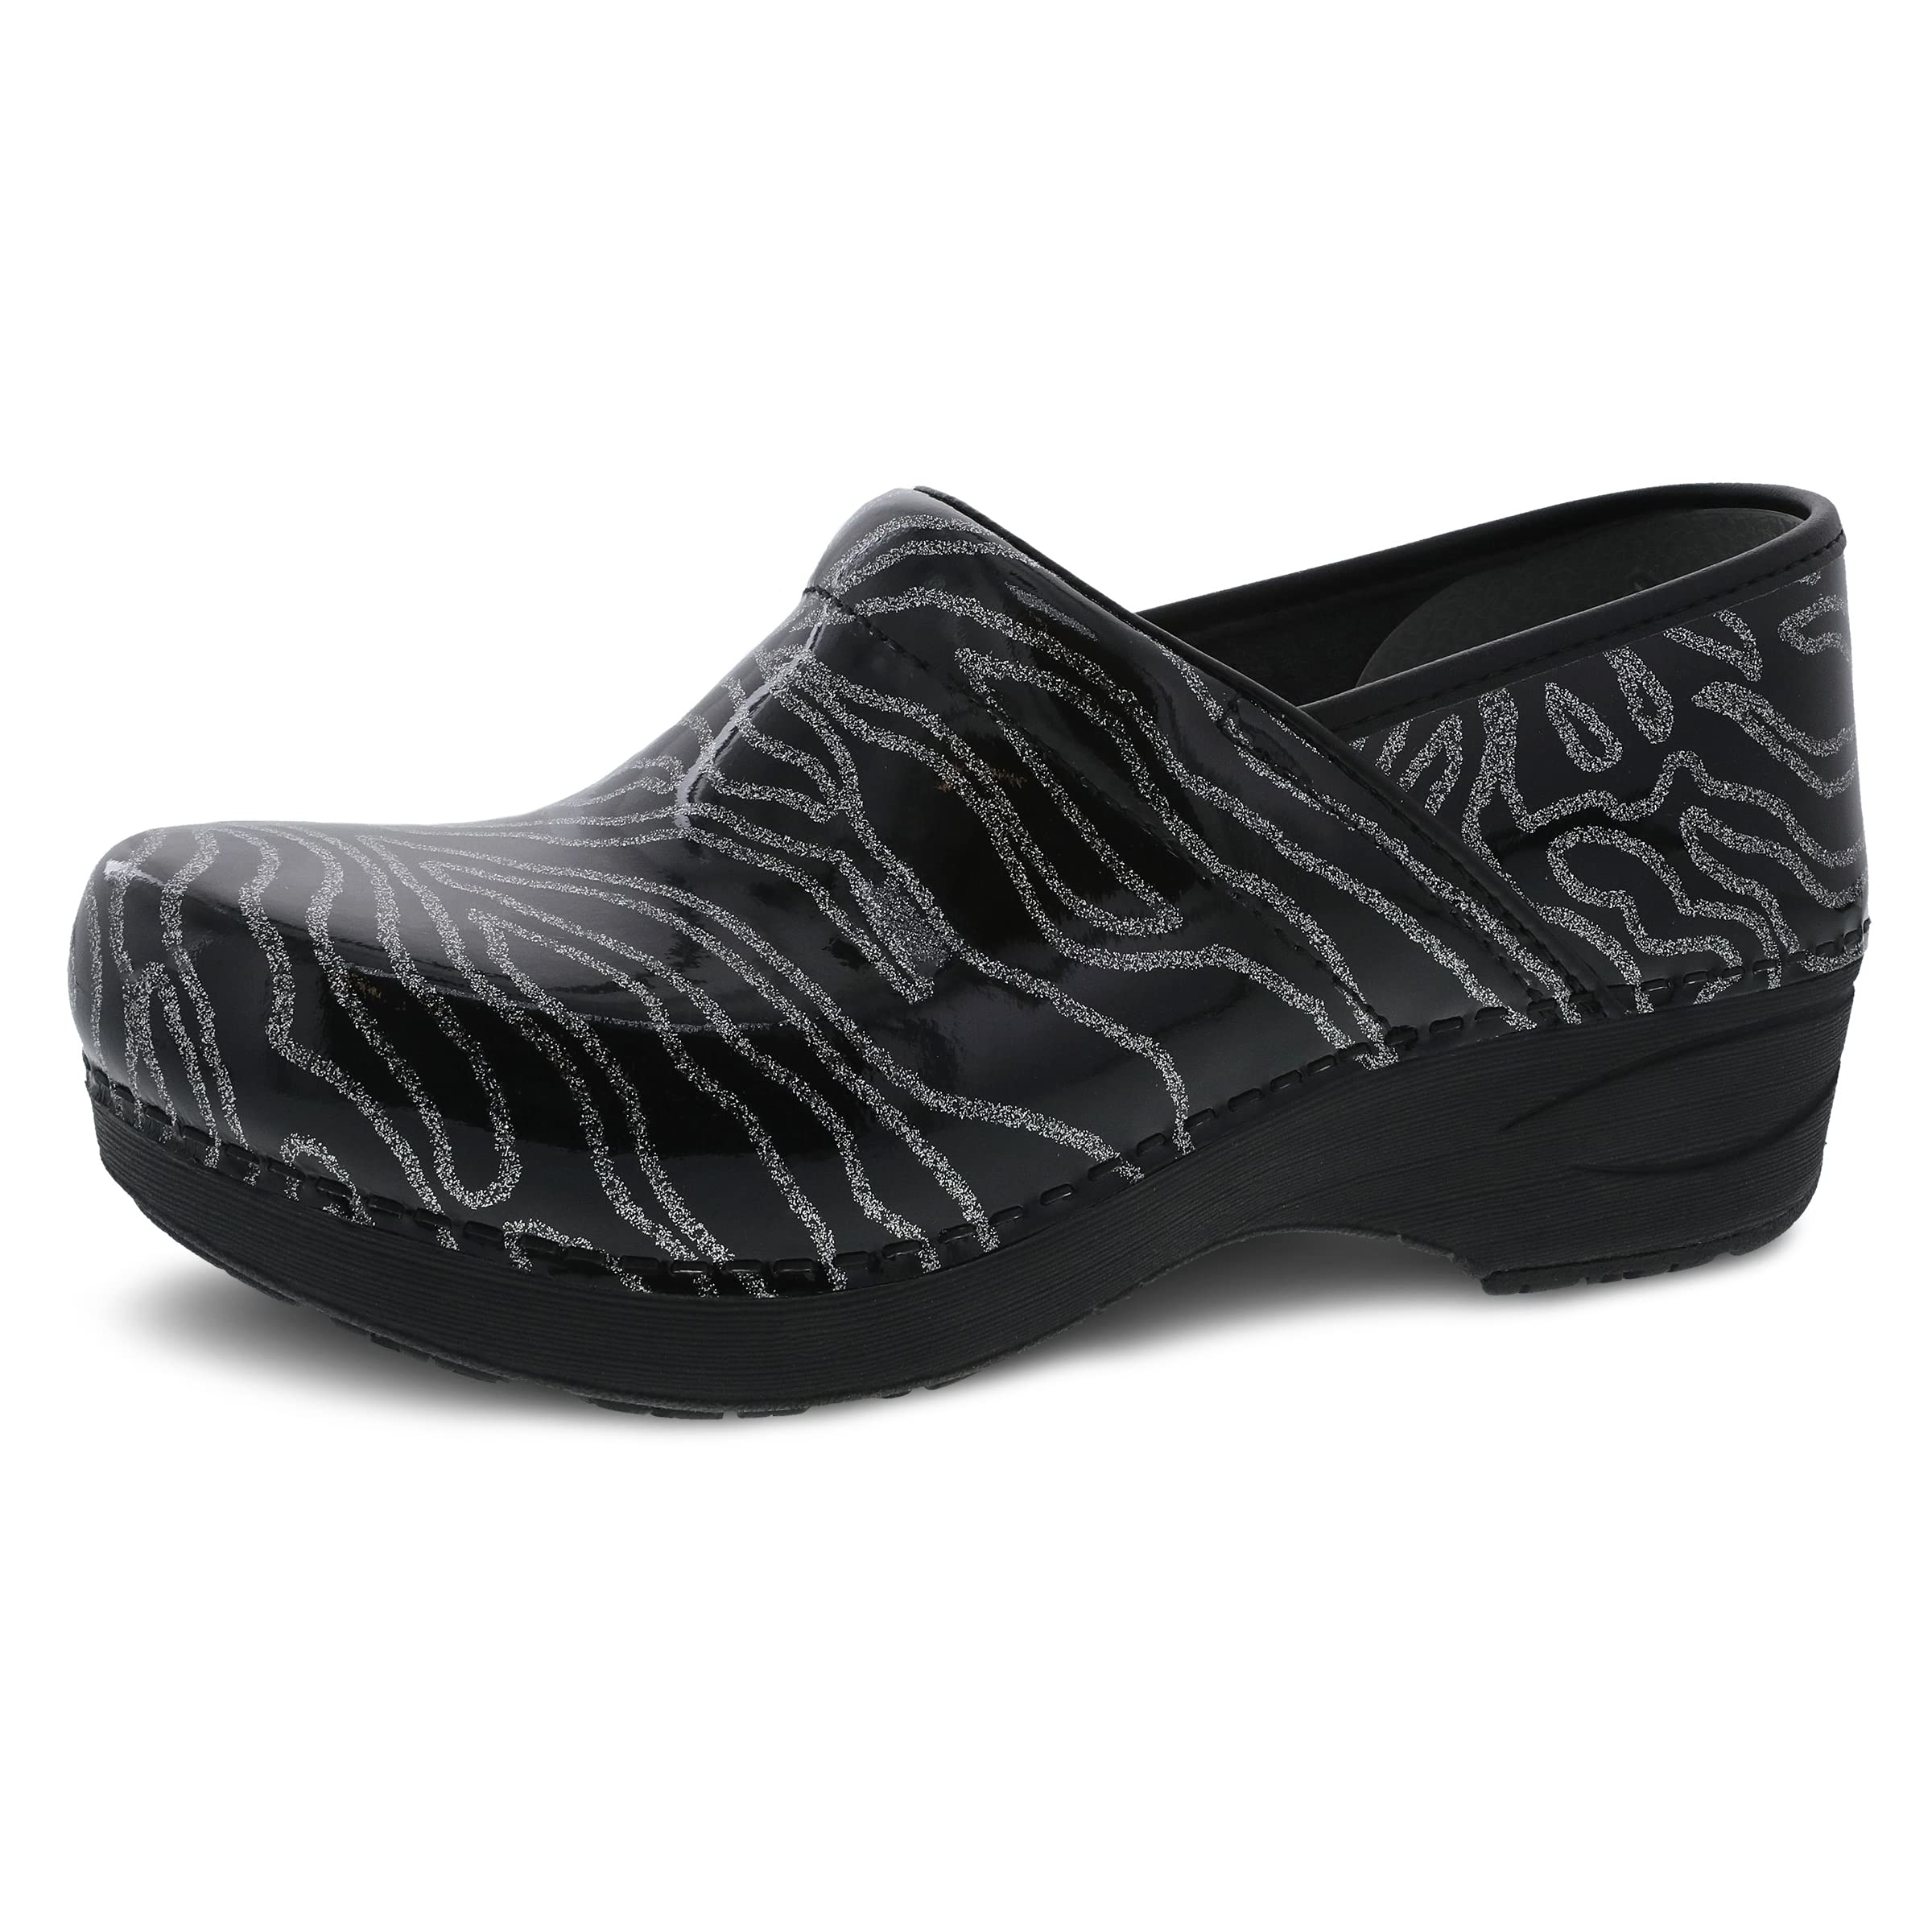 Dansko XP 20 clogs for Women - Lightweight Slip Resistant Footwear for comfort and Support - Ideal for Long Standing Professiona